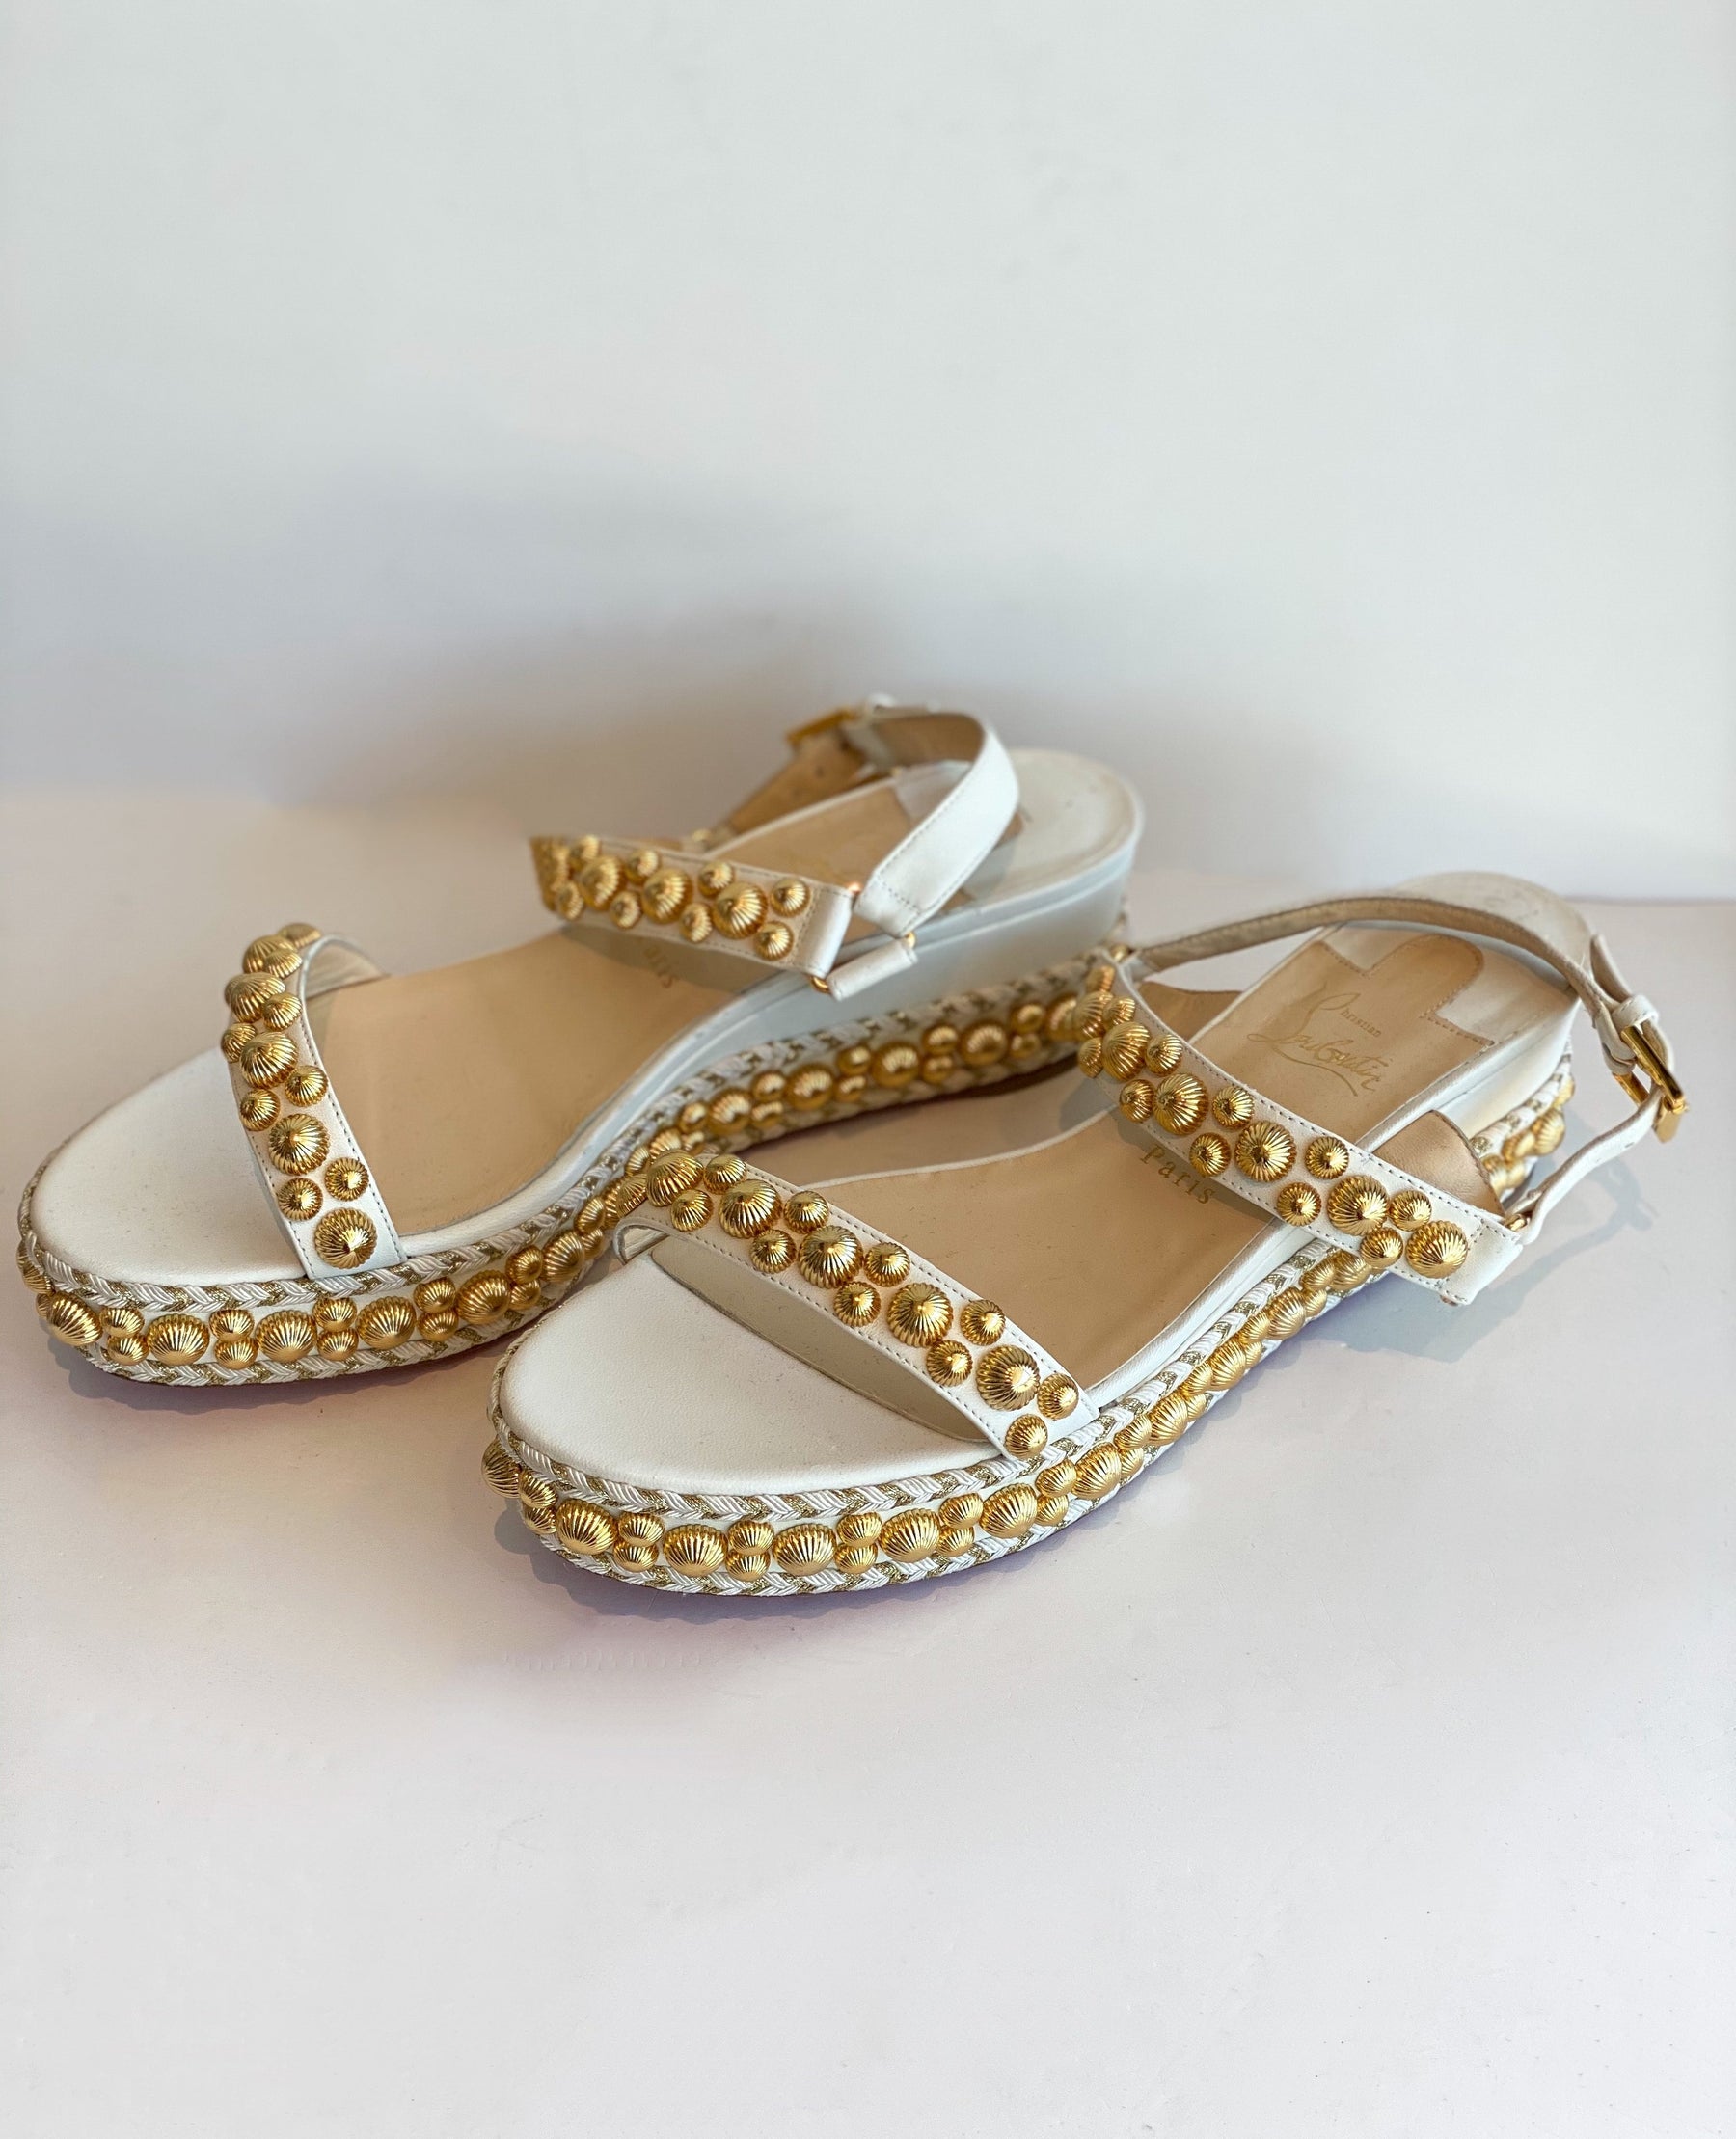 Christian Louboutin Studded Wedge Sandals White and Gold Side of Shoes